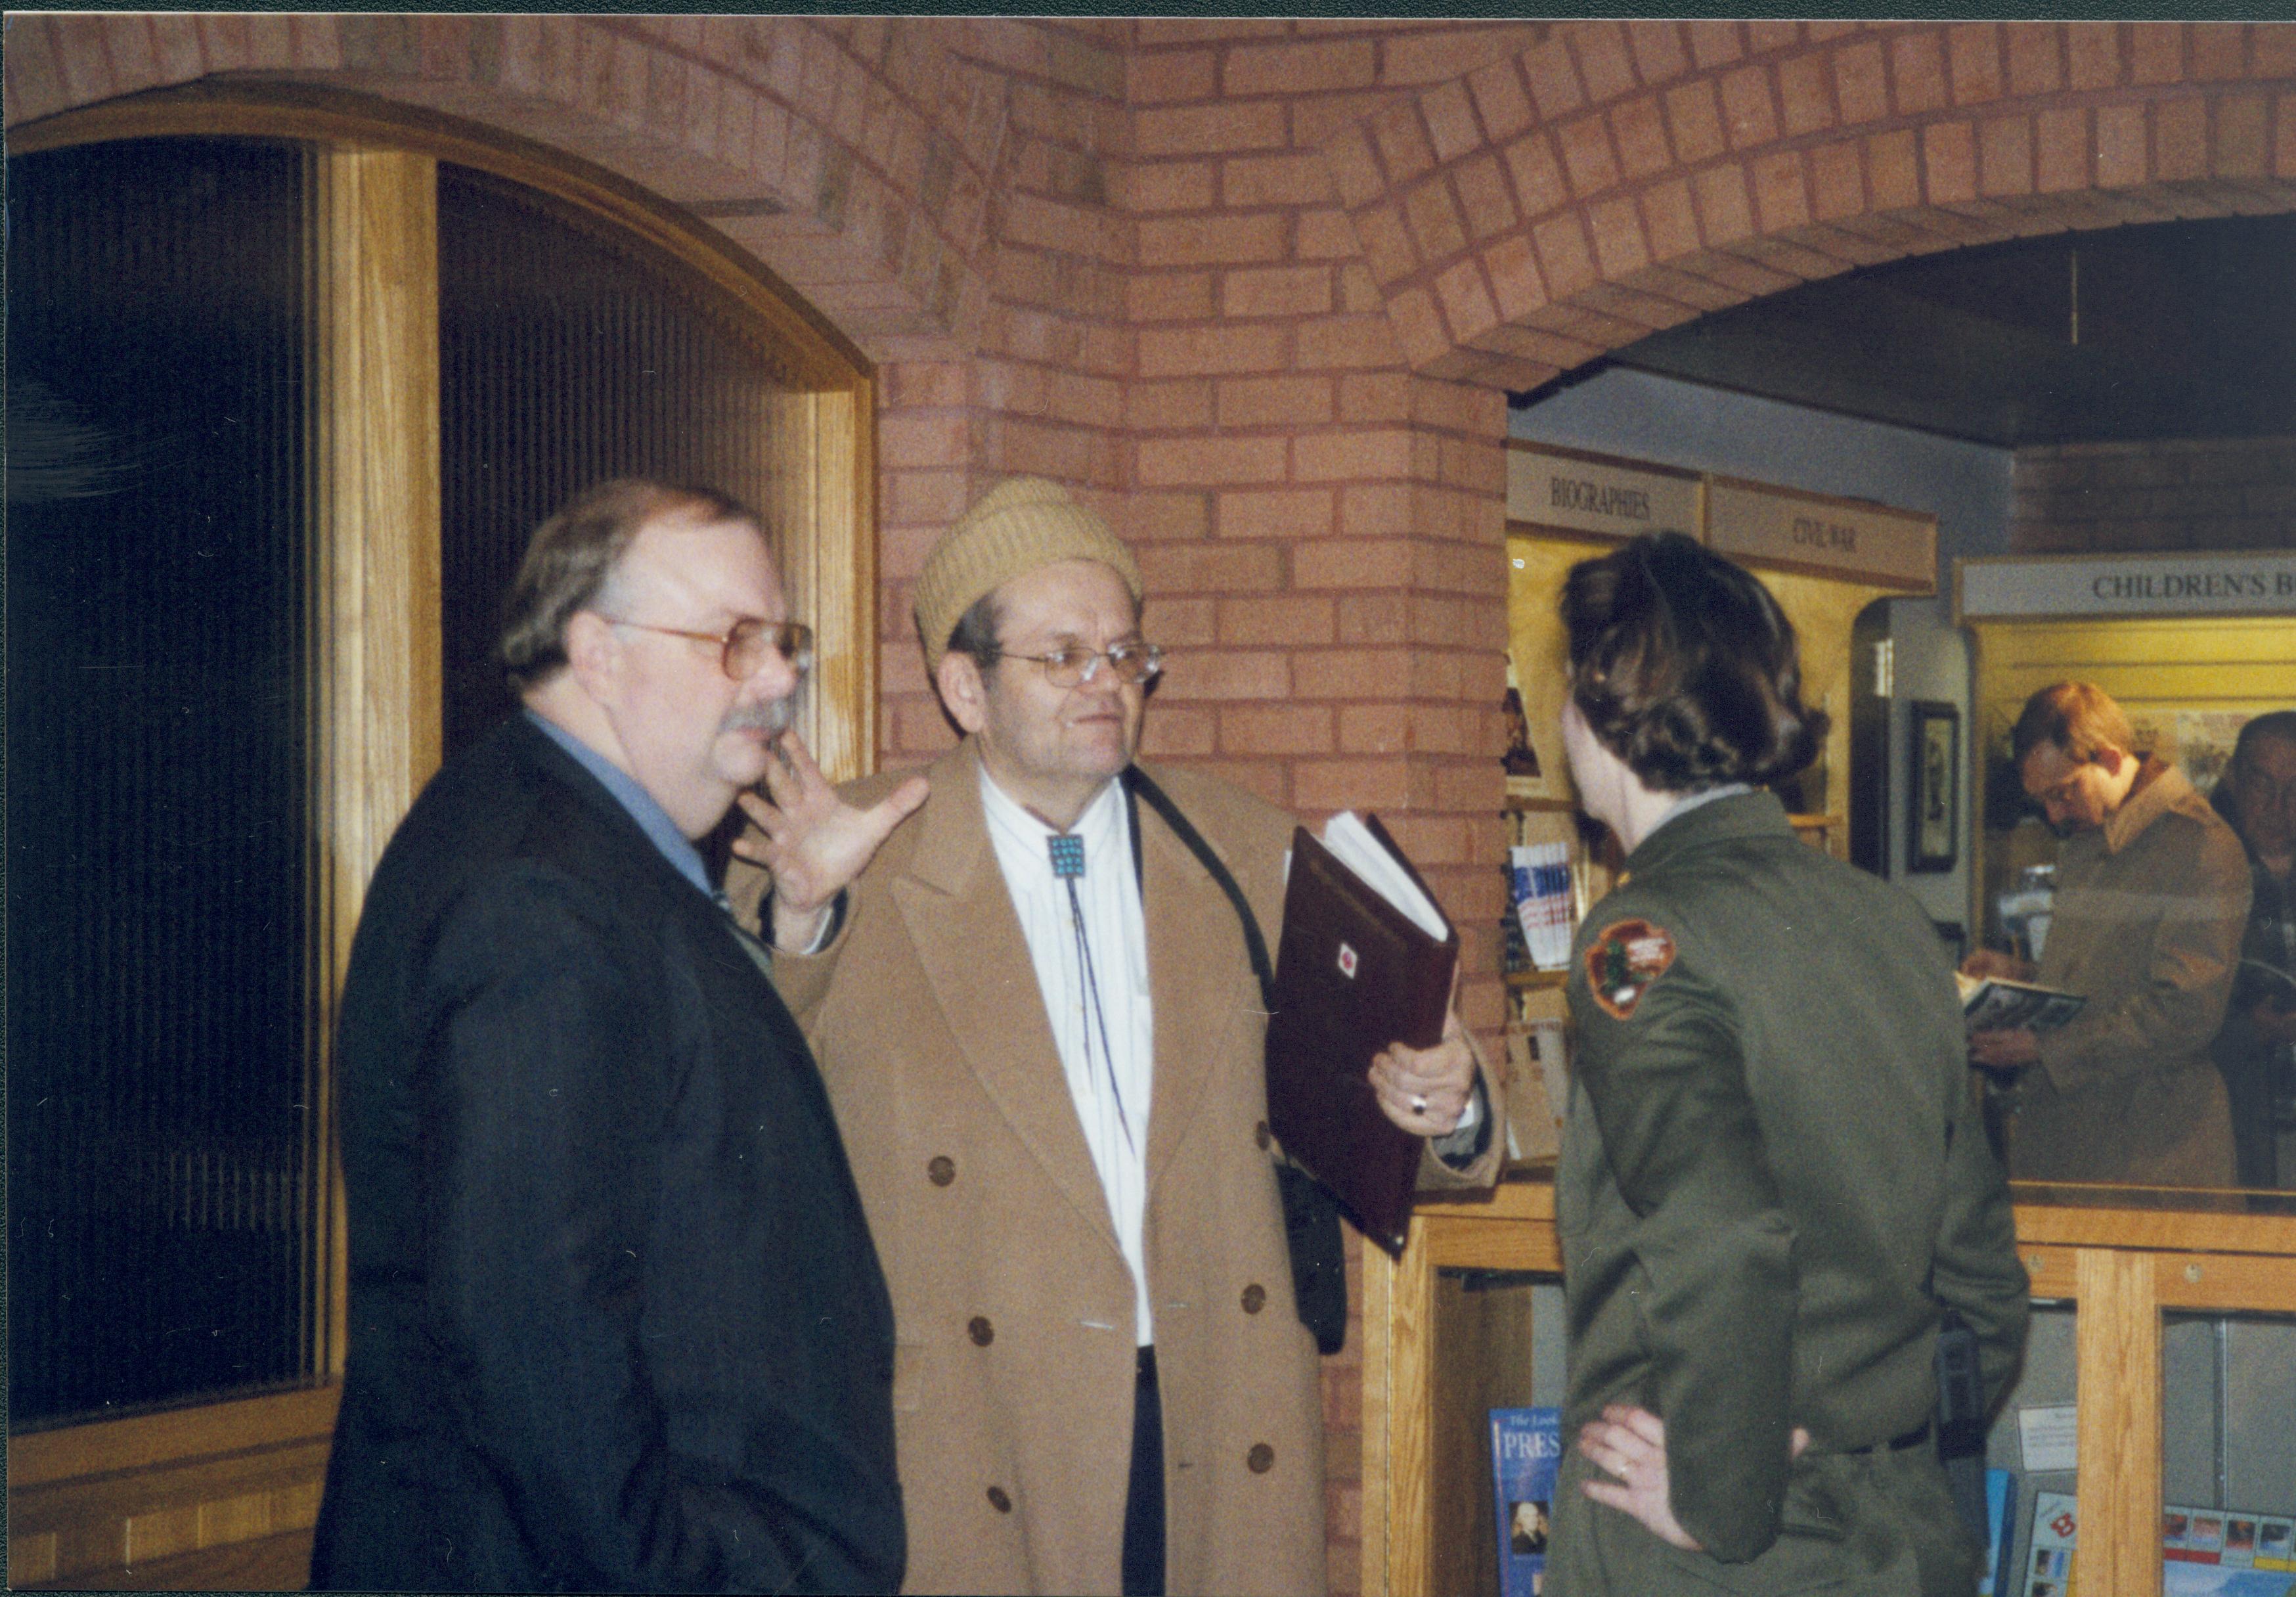 NA Lincoln Home NHS- Lincoln Birthday, George Painter Lectures, Roll 2001-1 exp 16 reception, lecture